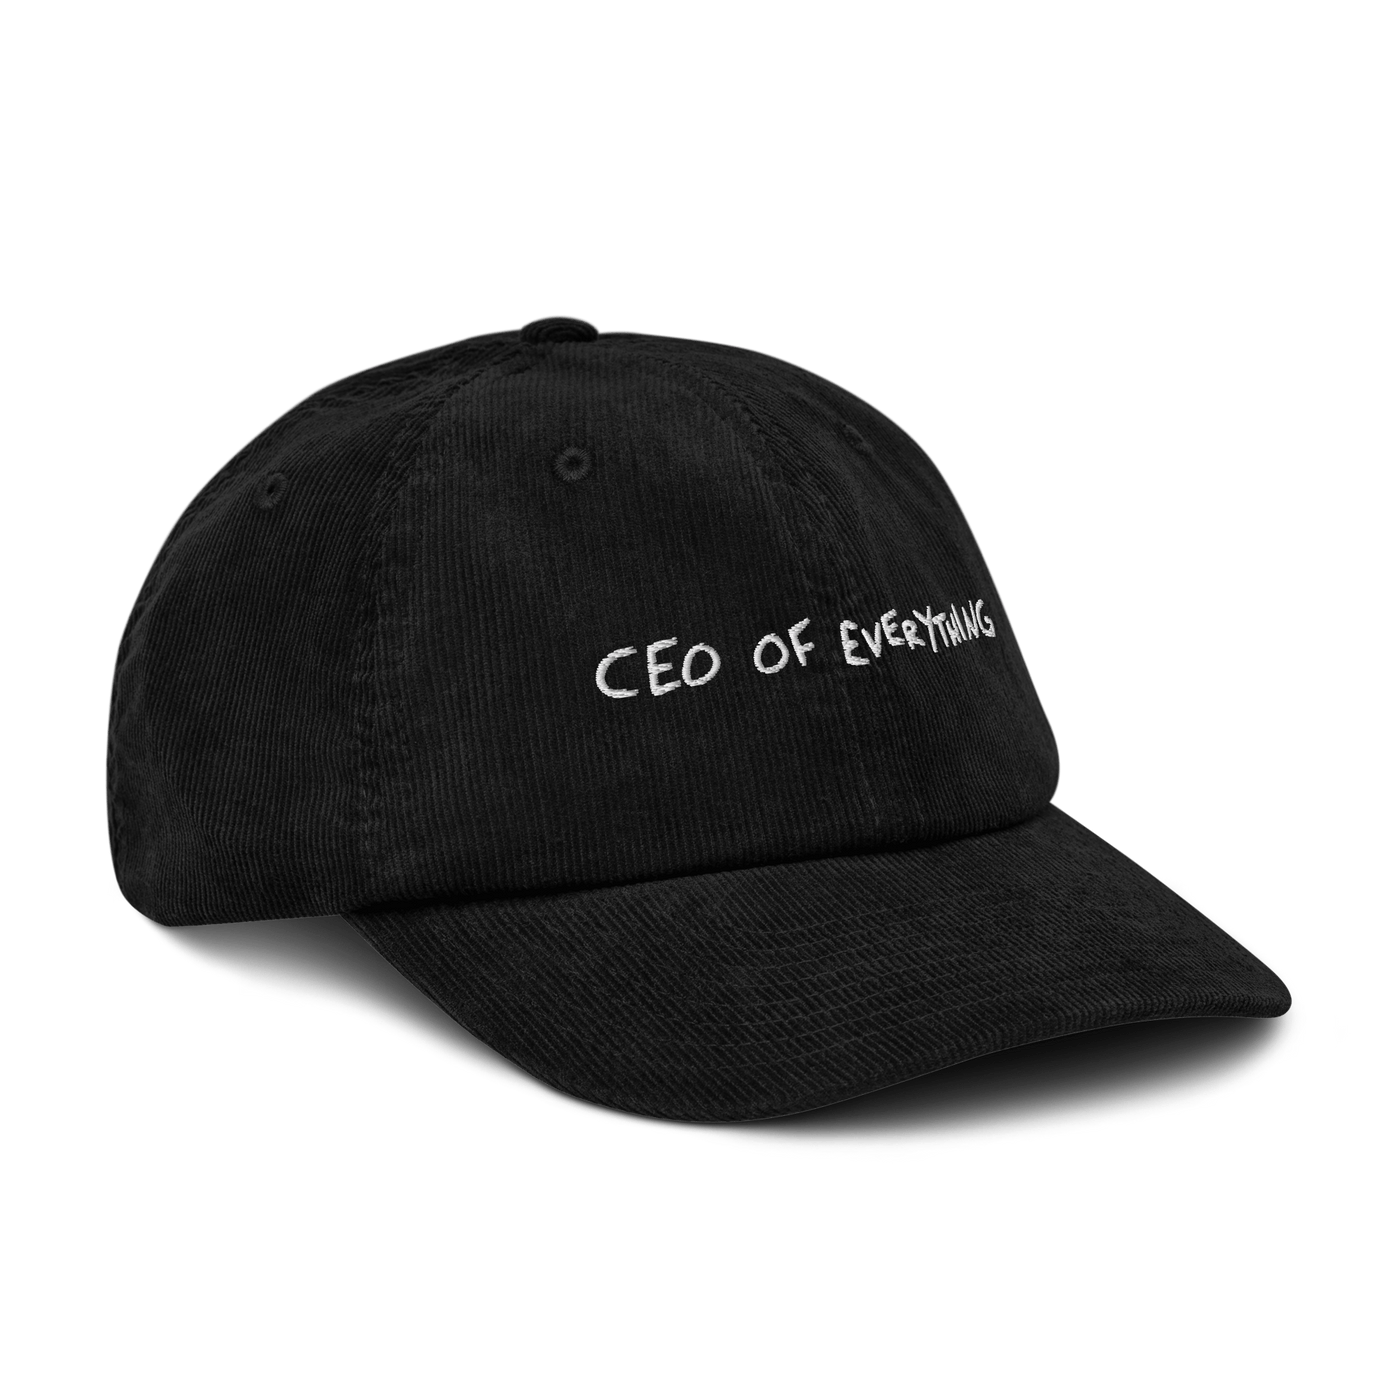 CEO of everything Corduroy hat - Black - - Just Another Cap Store